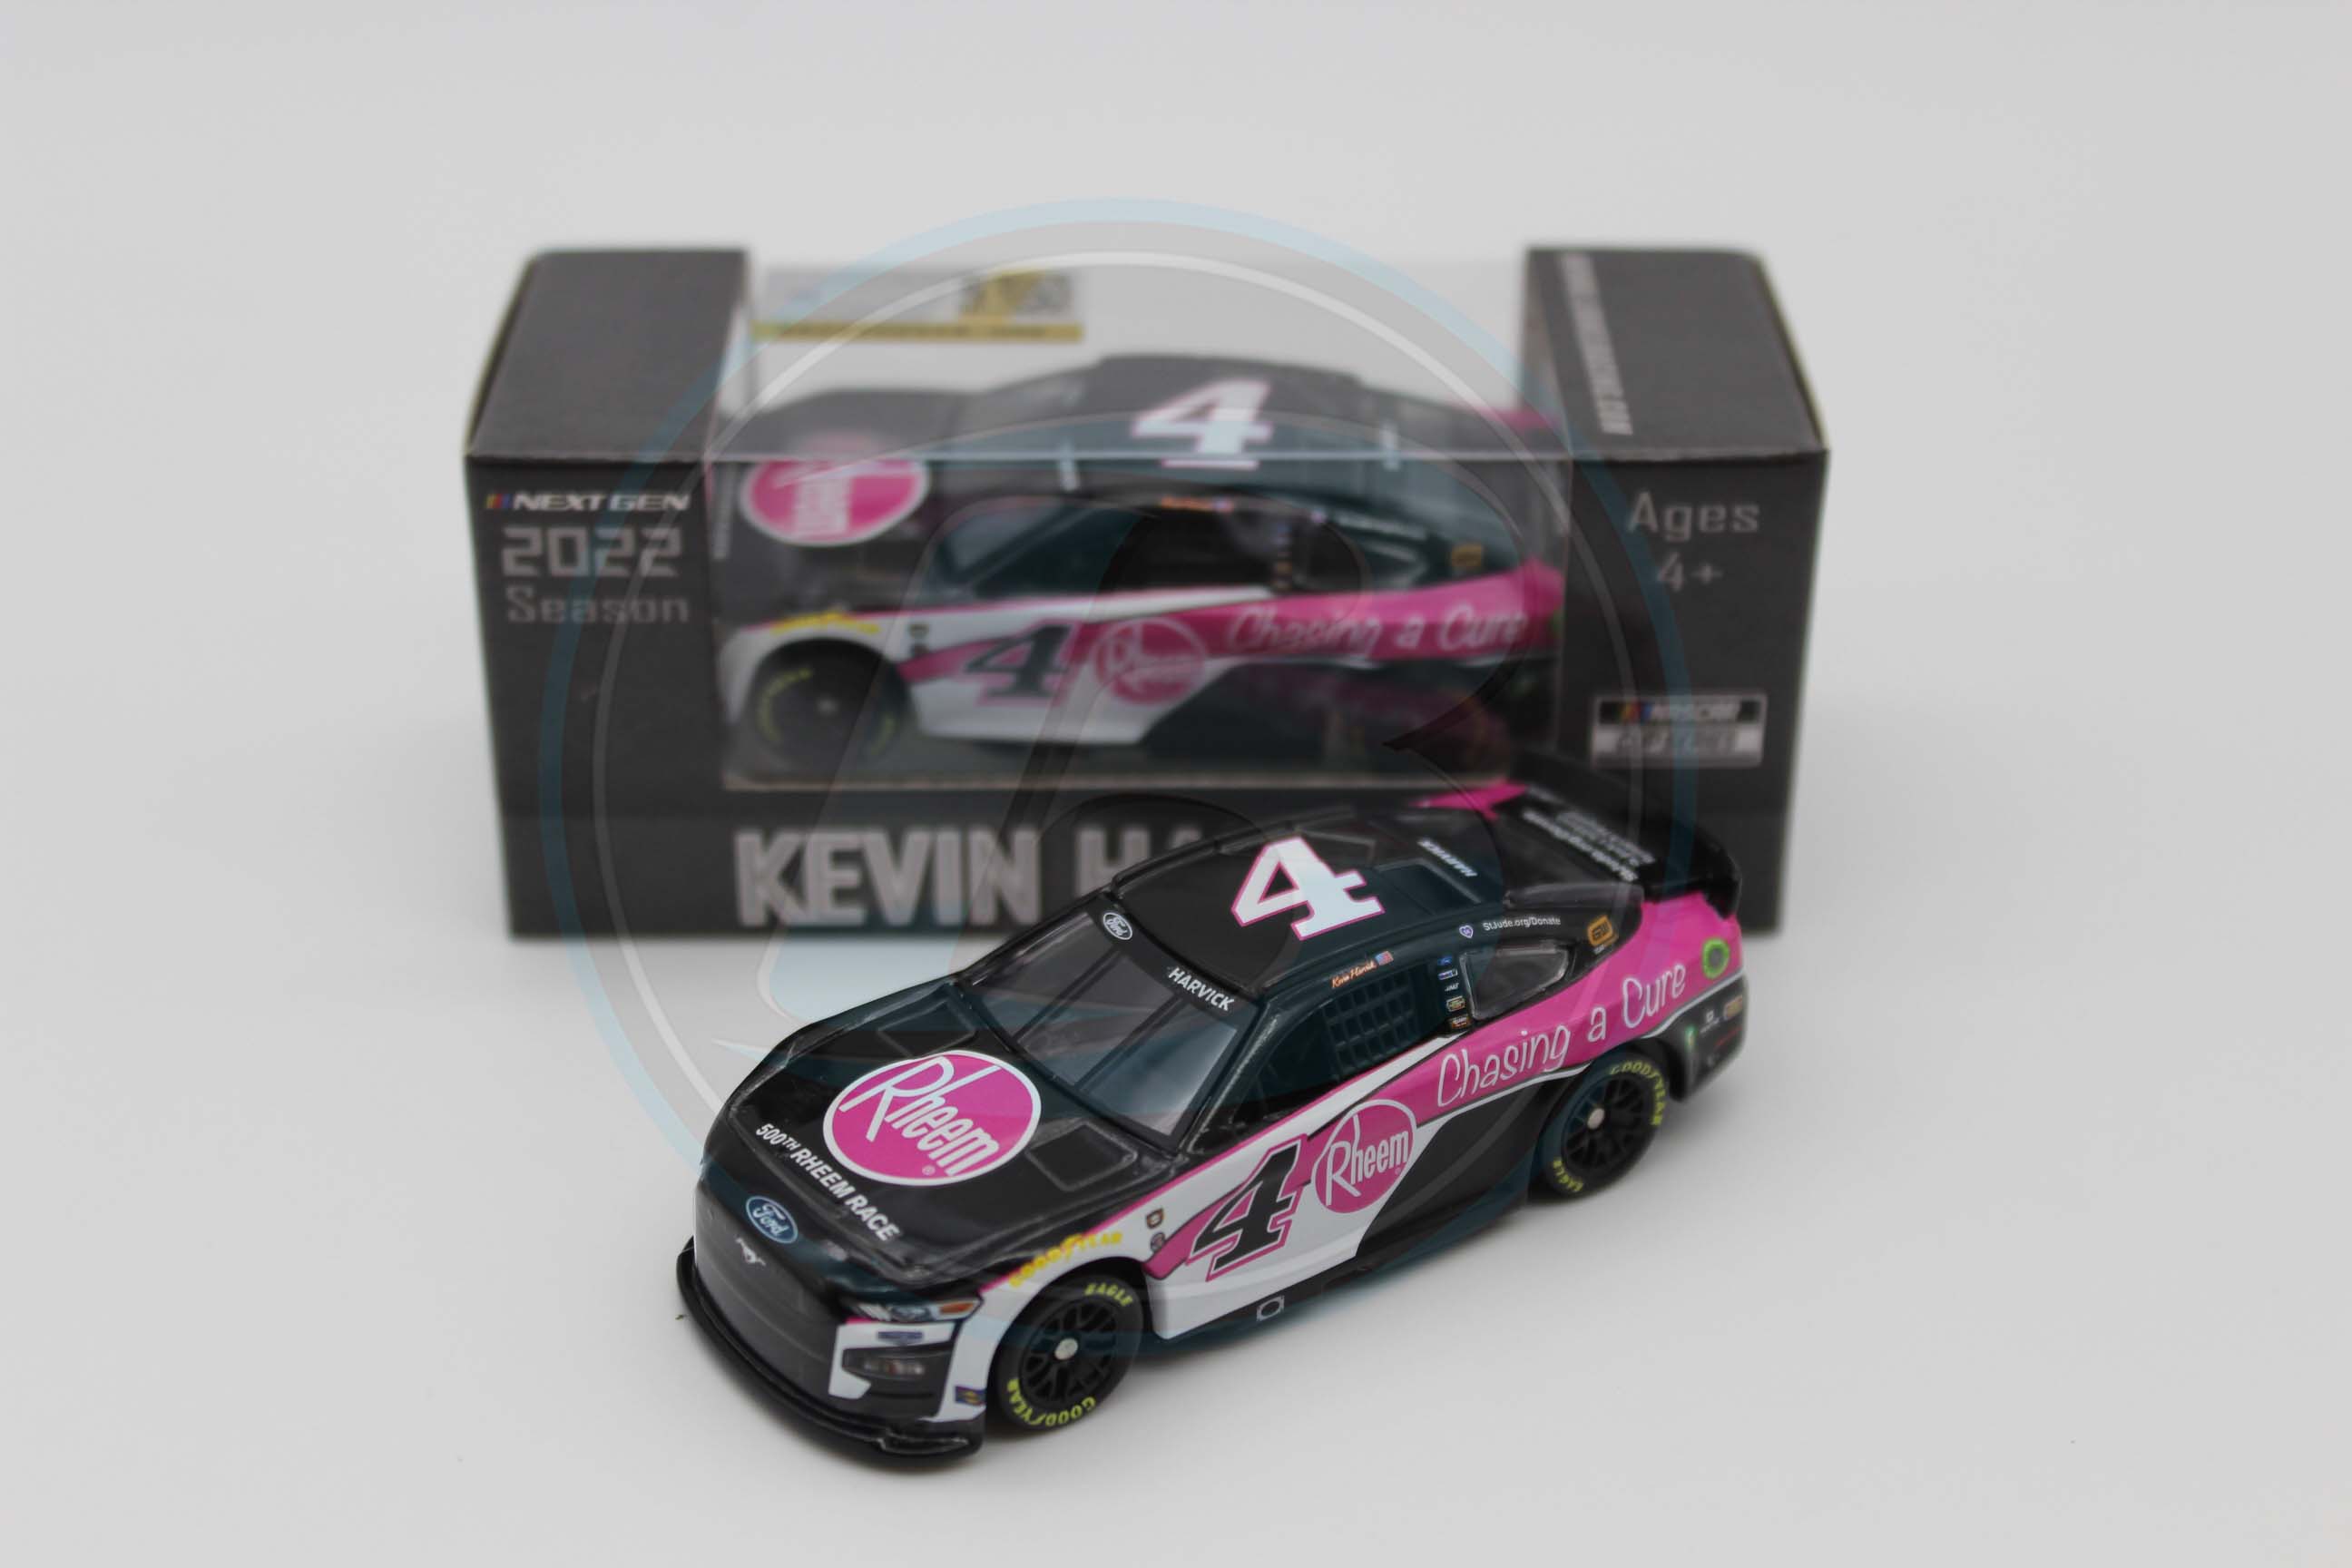 kevin-harvick-2022-rheem-500th-race-chasing-a-cure-1-64-nascar-diecast